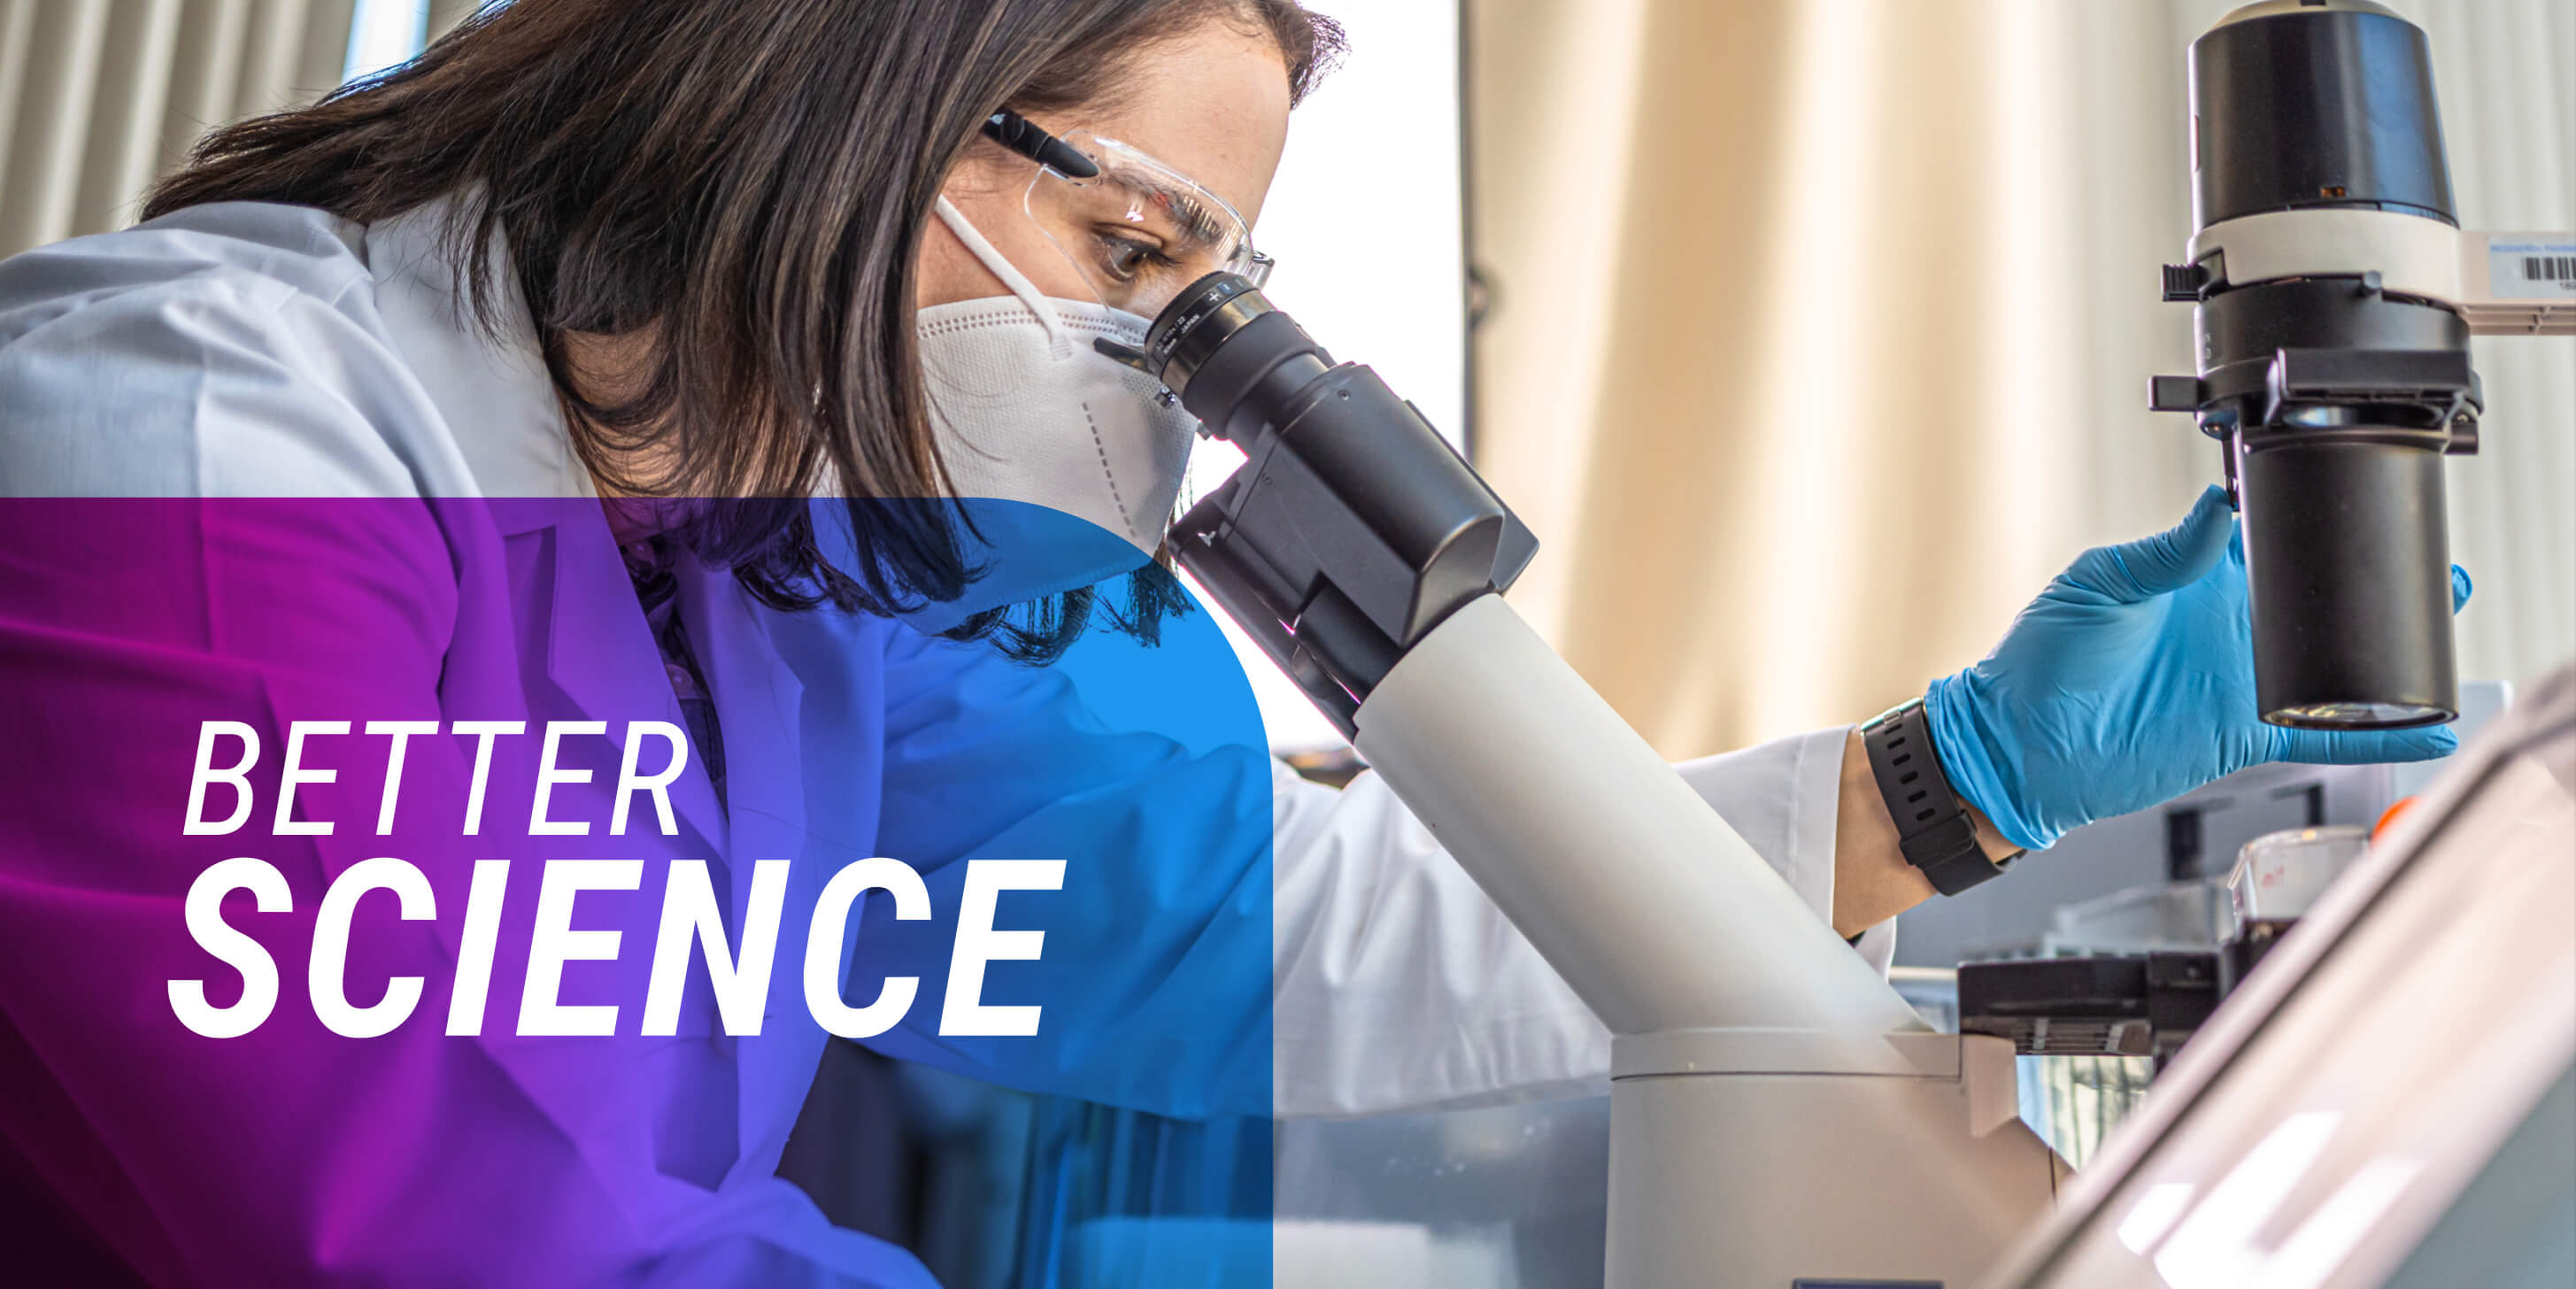 'Better Science' text over an image of a female scientist looking through a microscope.